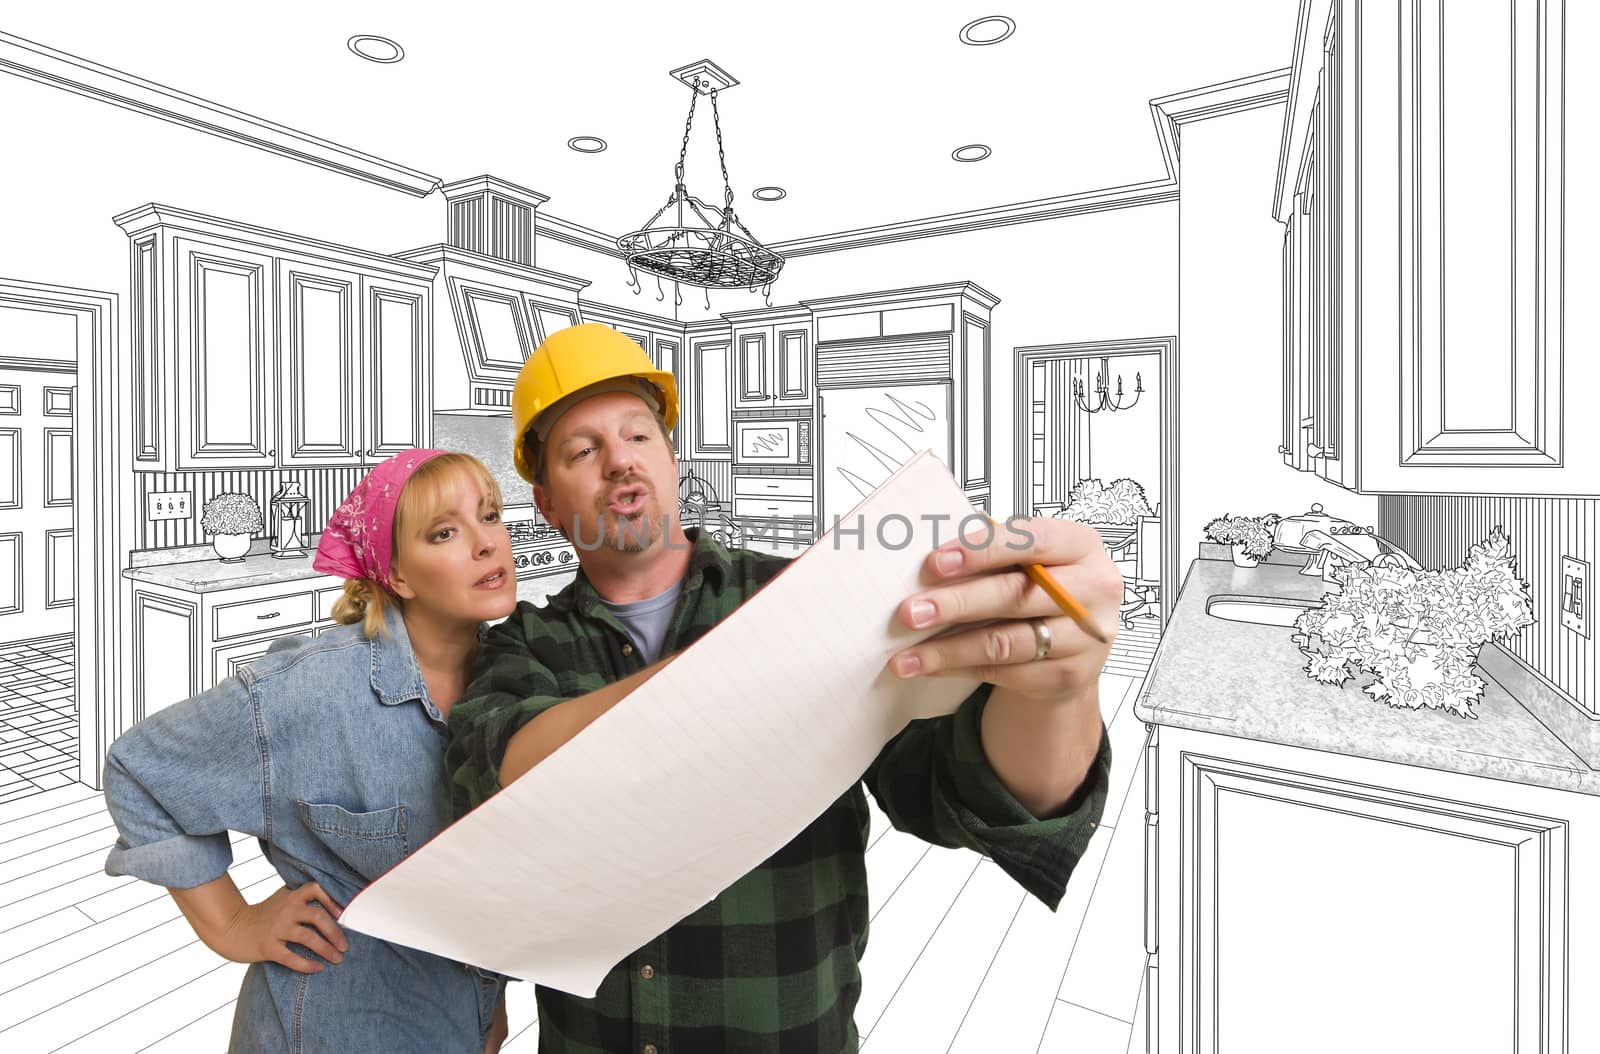 Contractor Discussing Plans with Woman, Kitchen Drawing Behind by Feverpitched